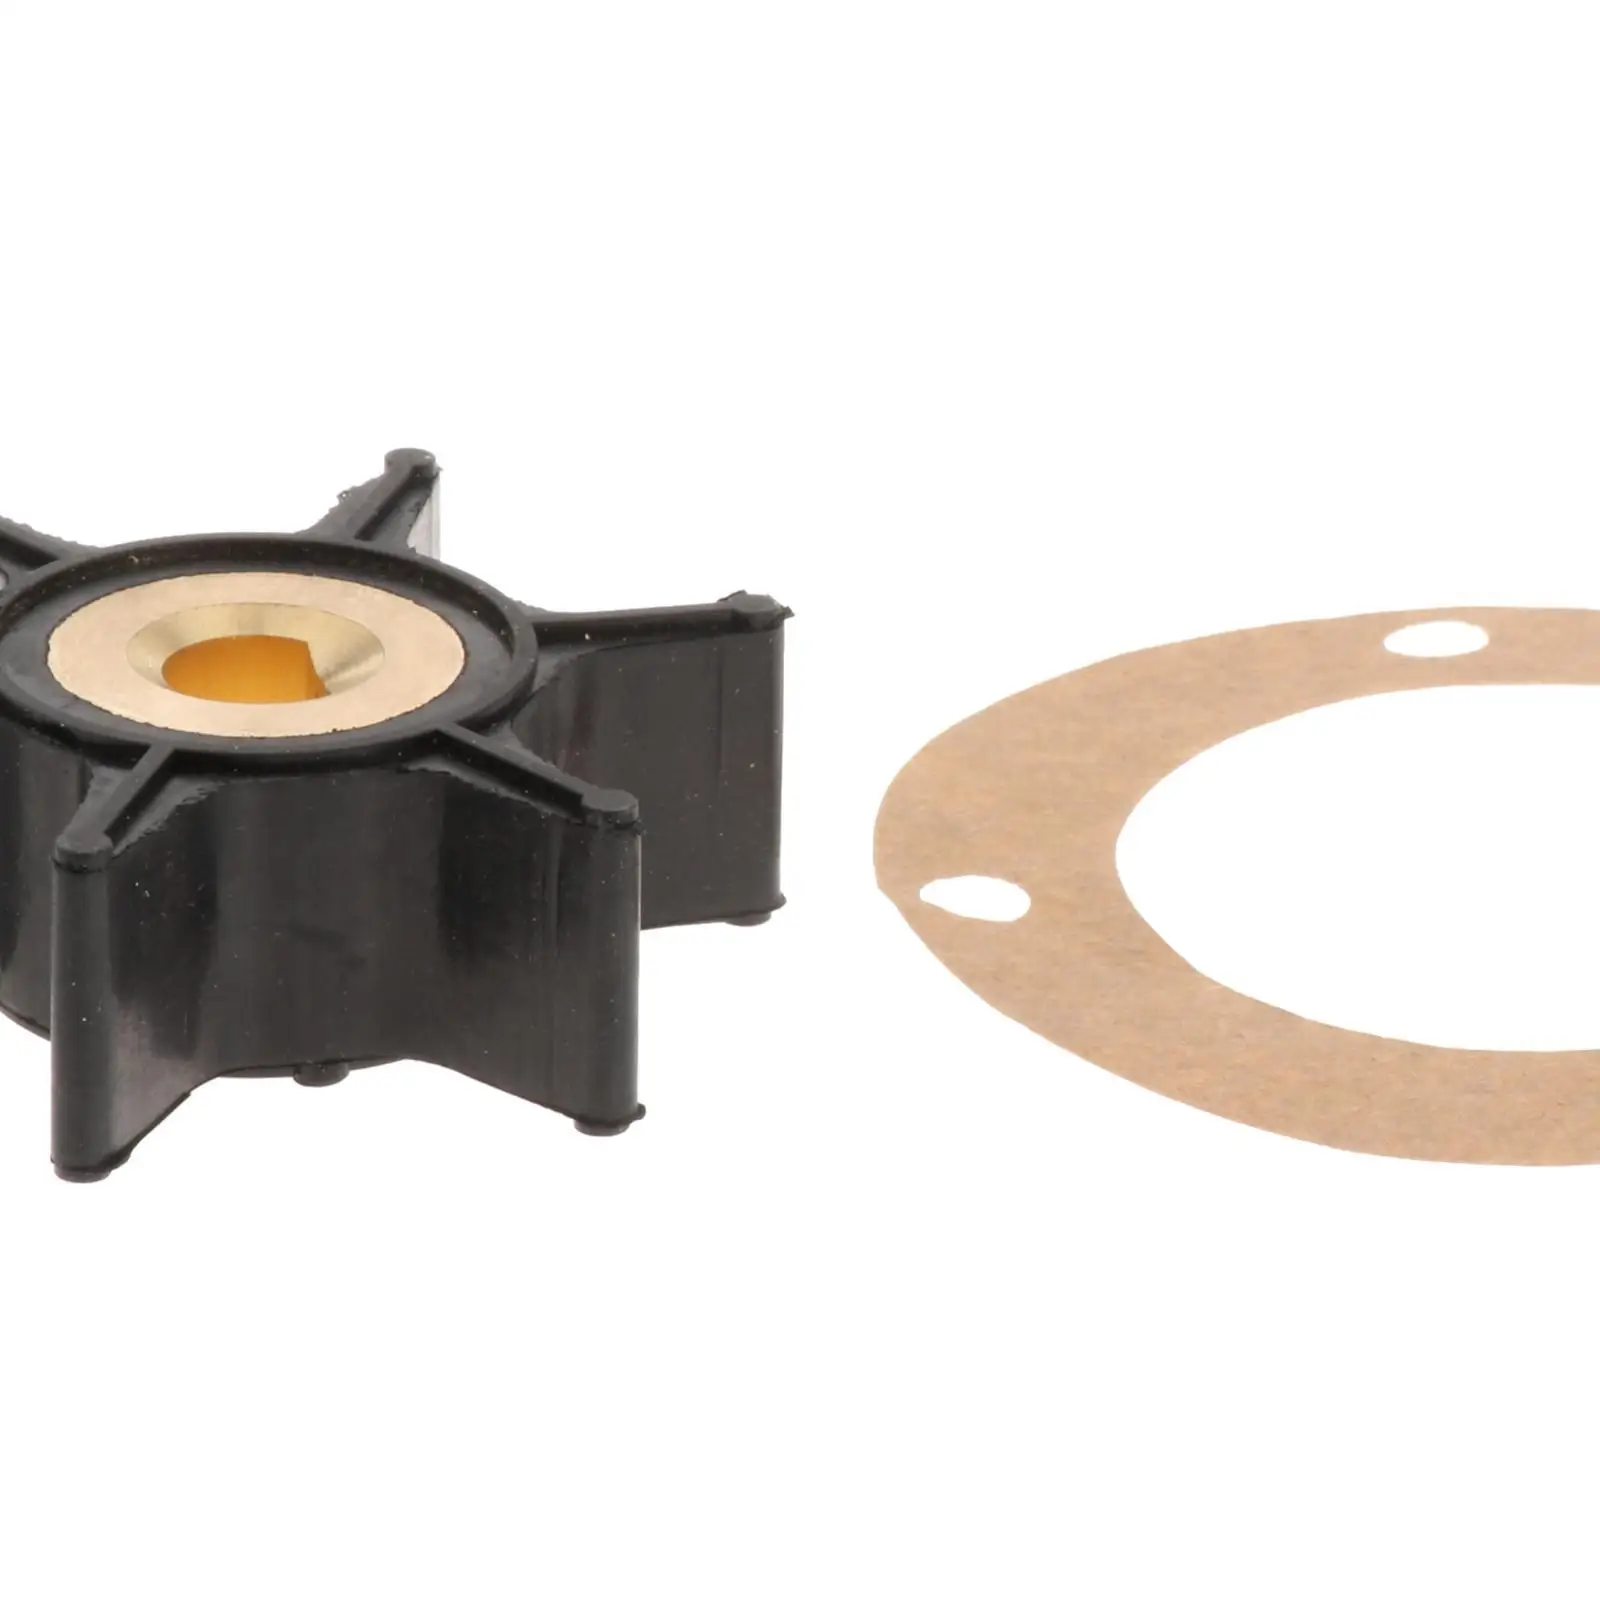 2 Pieces Impeller and 4-Hole Gasket Kit Accessories  Parts Impeller Gasket Kit  131-0386 170-3172 Mcck 4.0 kW ,131-0257